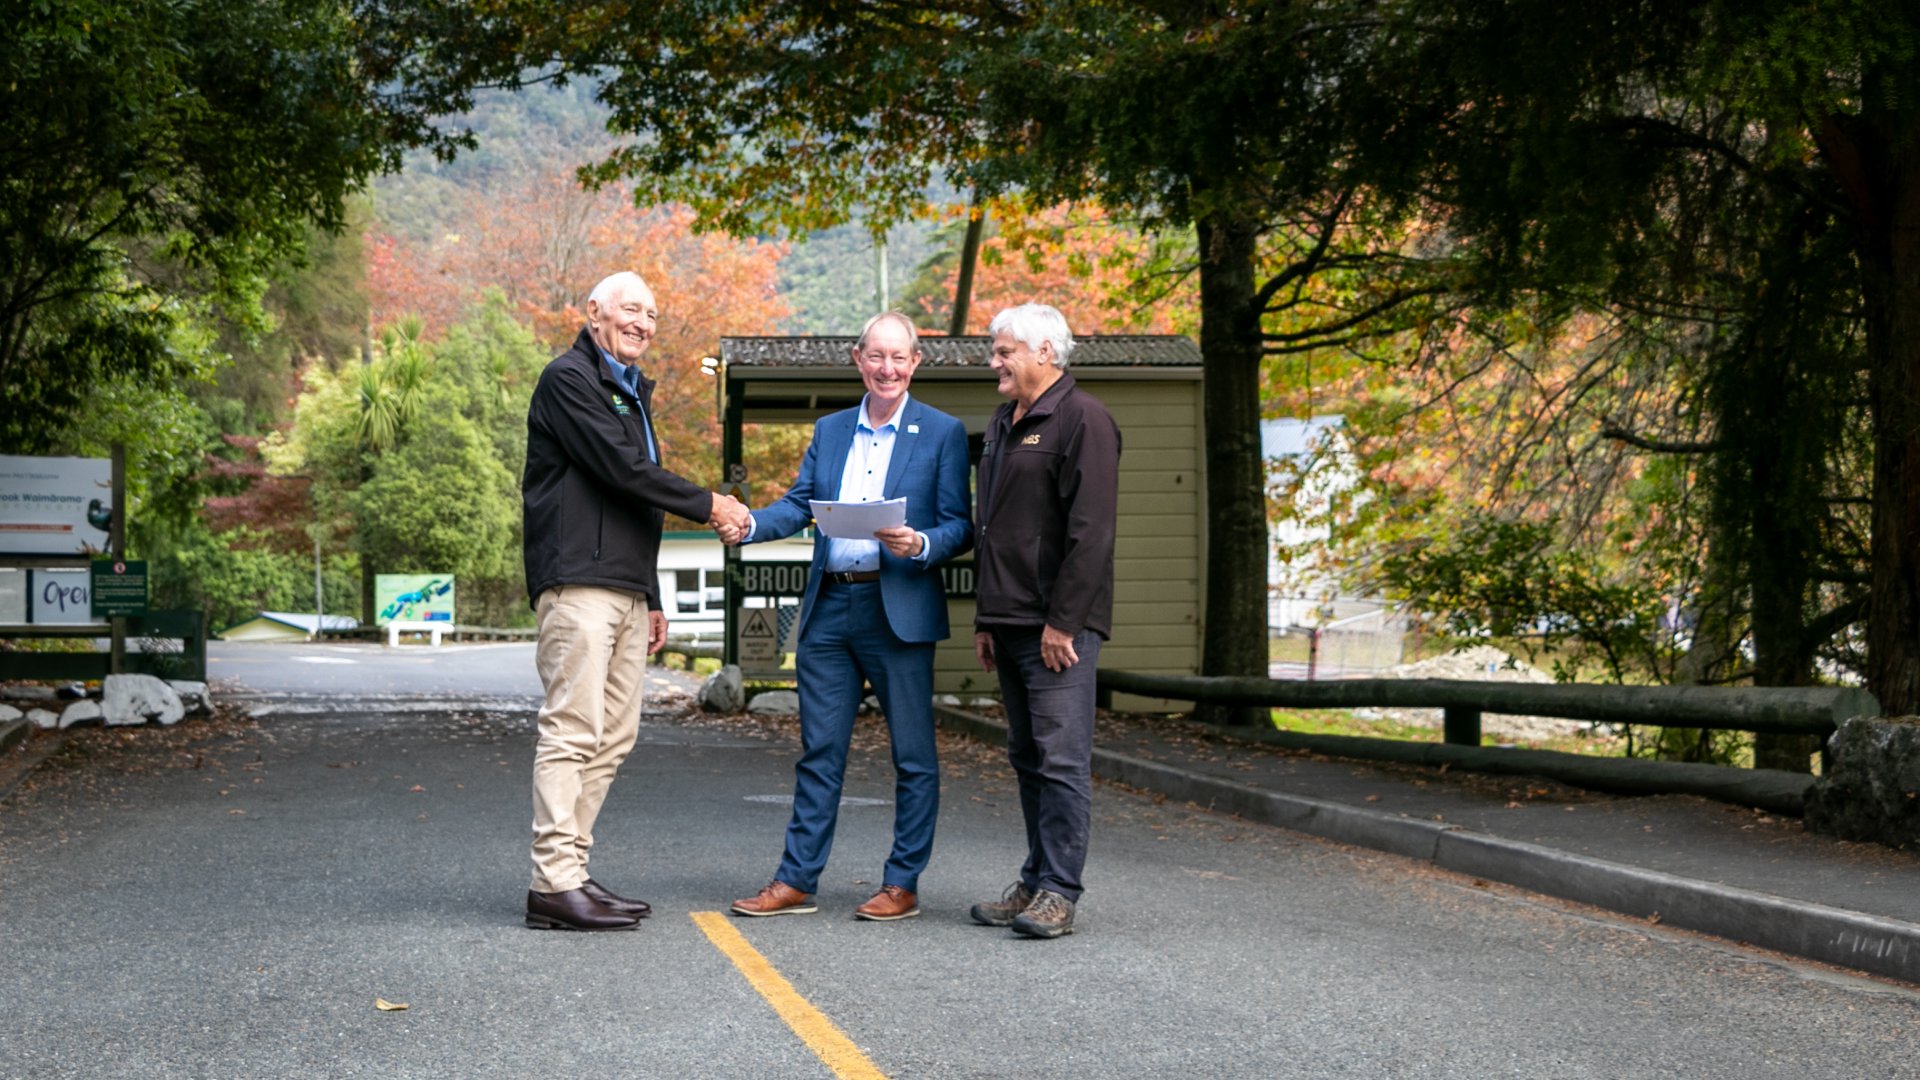 Brook Waimārama Sanctuary Trust Chair Chris Hawkes, left, with Nelson Mayor Nick Smith and Brook Sanctuary Chief Executive Ru Collin, after signing the agreements for the Brook Valley Holiday Park.